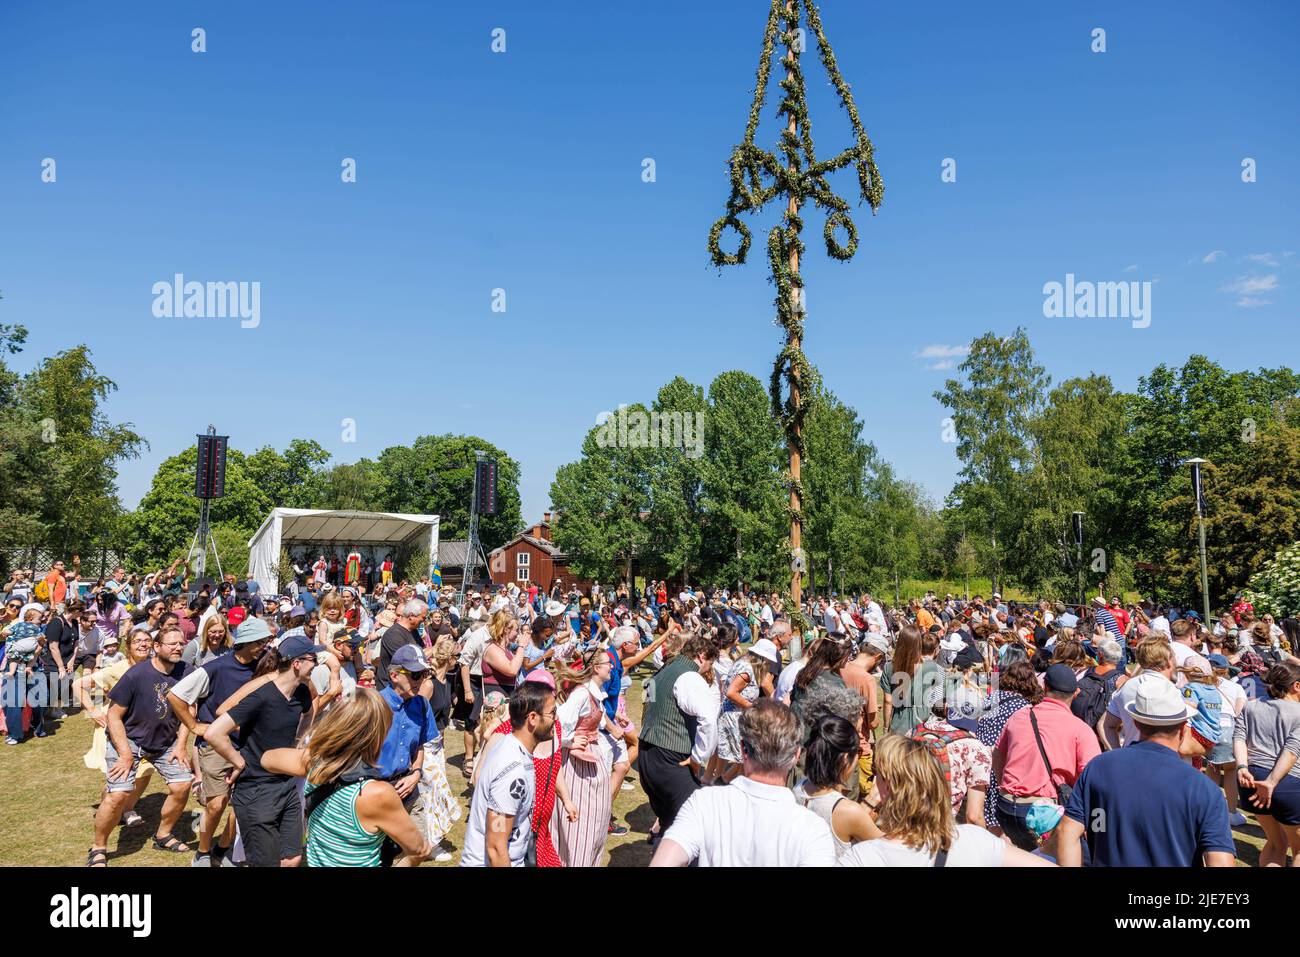 Stockholm, Sweden. 25th June, 2022. People celebrate the Midsummer Festival in Stockholm, Sweden, on June 25, 2022. Credit: Wei Xuechao/Xinhua/Alamy Live News Stock Photo